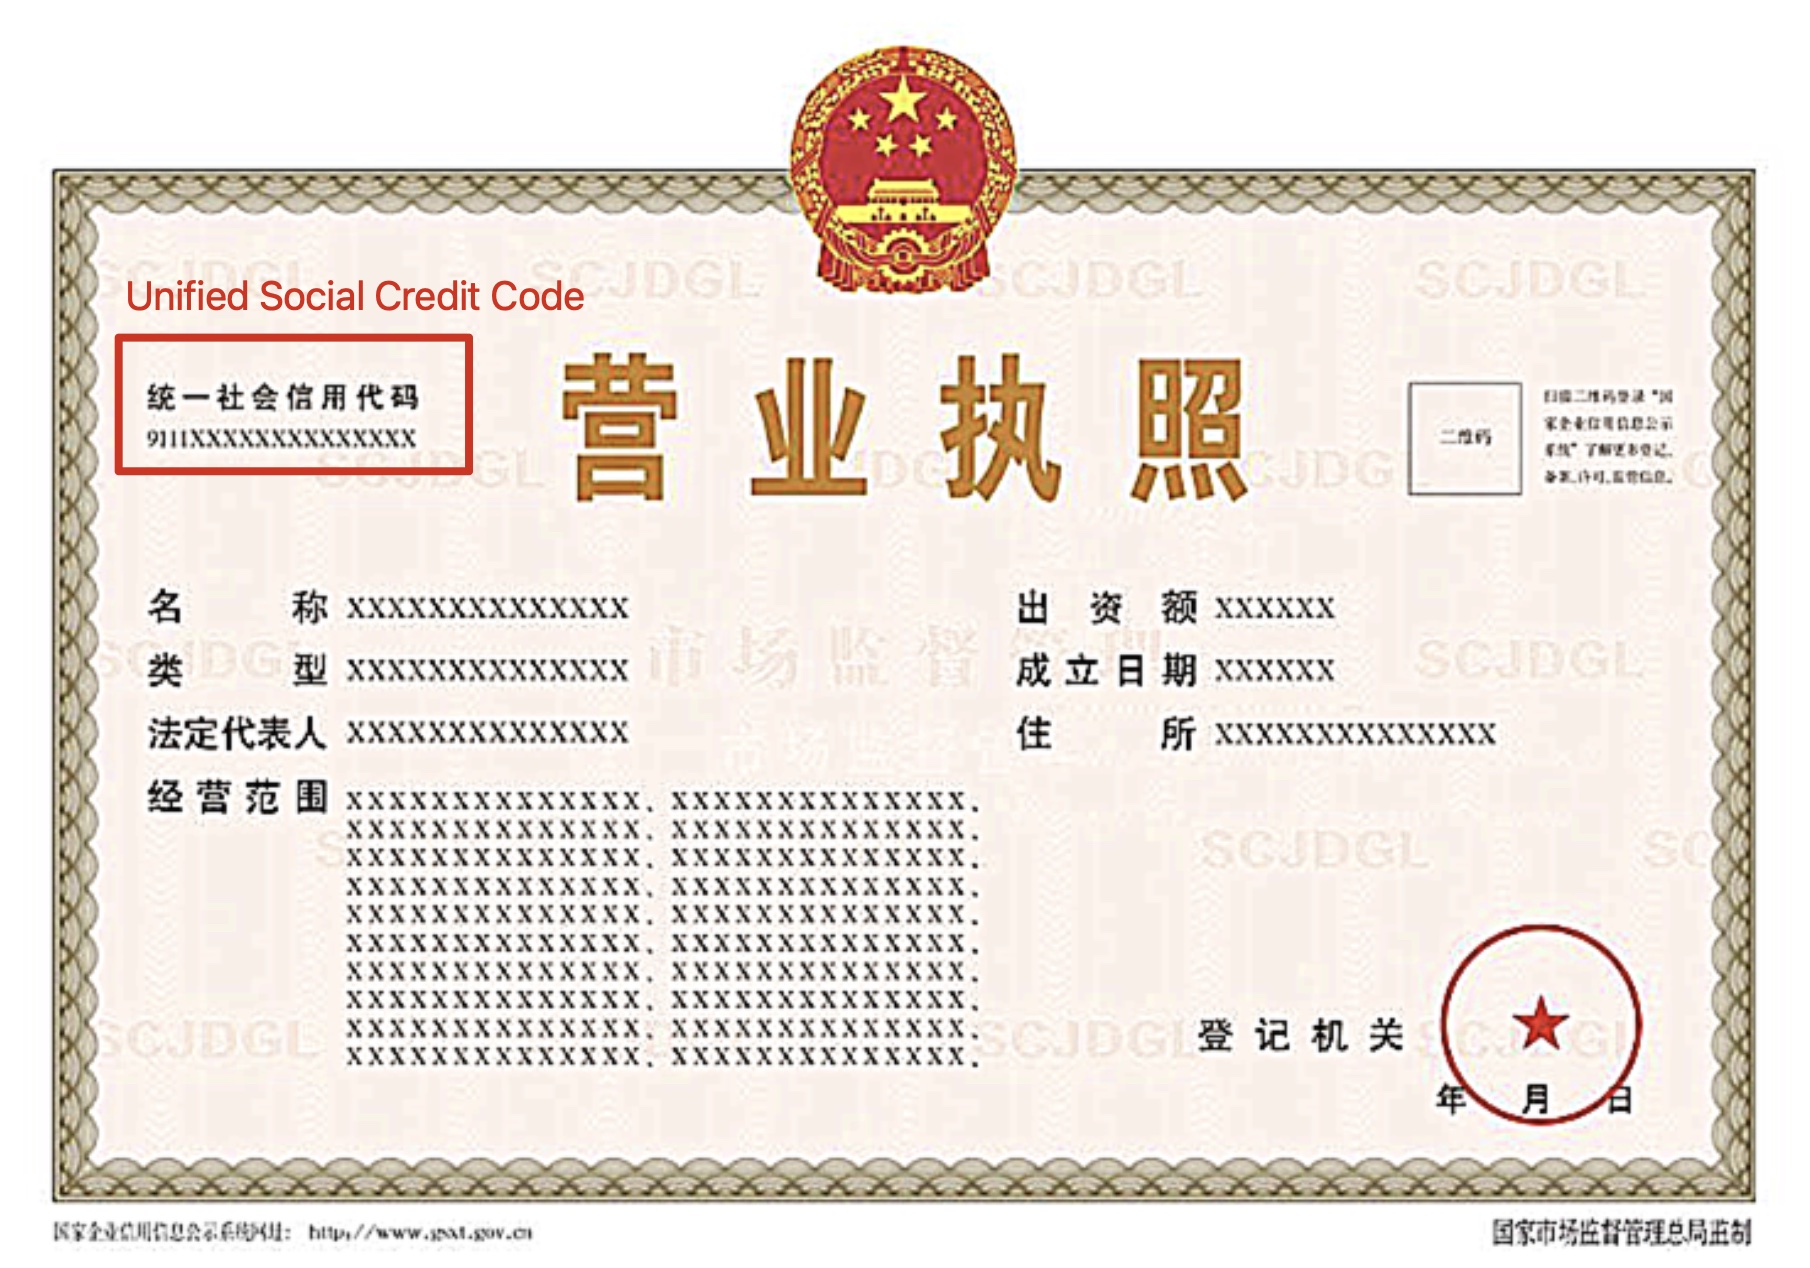 social credit code location on a business license